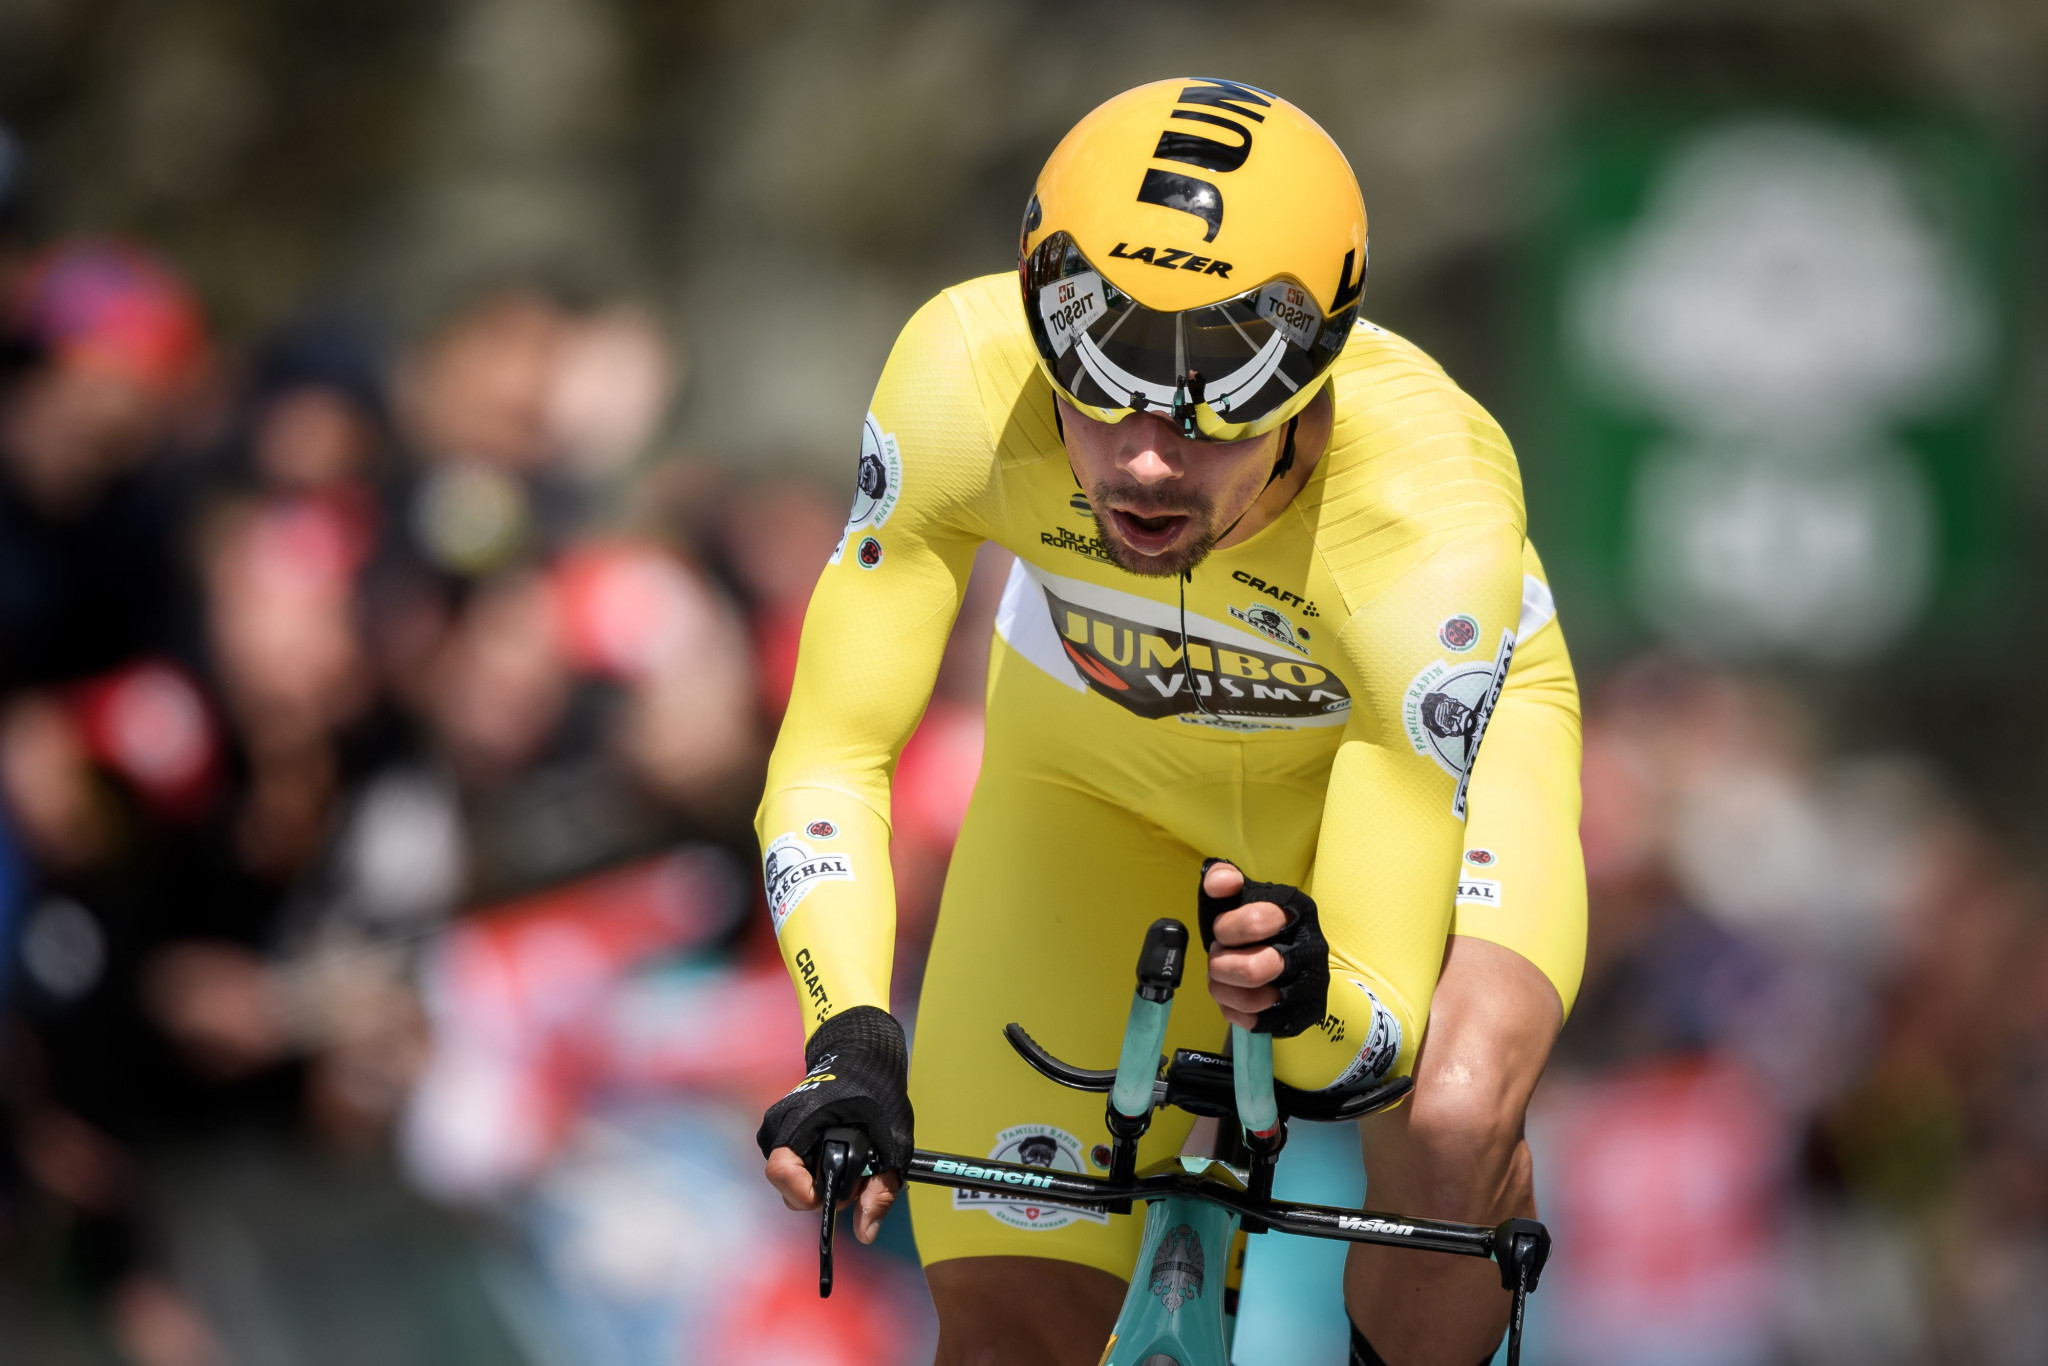 In-form Roglič among favourites for success at Giro d'Italia